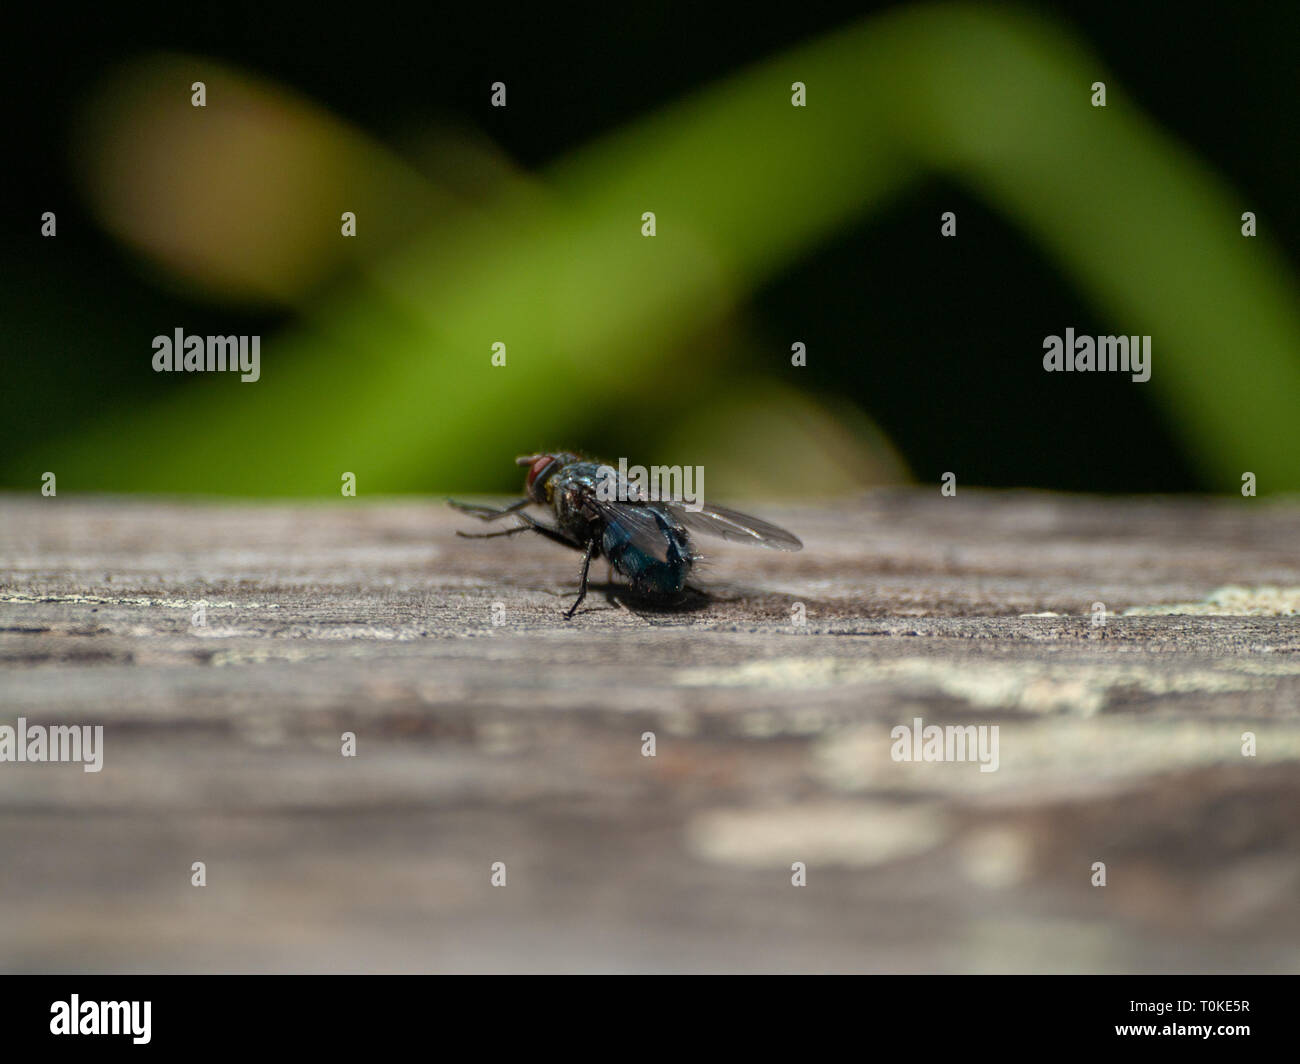 A fly perched on an old wooden board Stock Photo